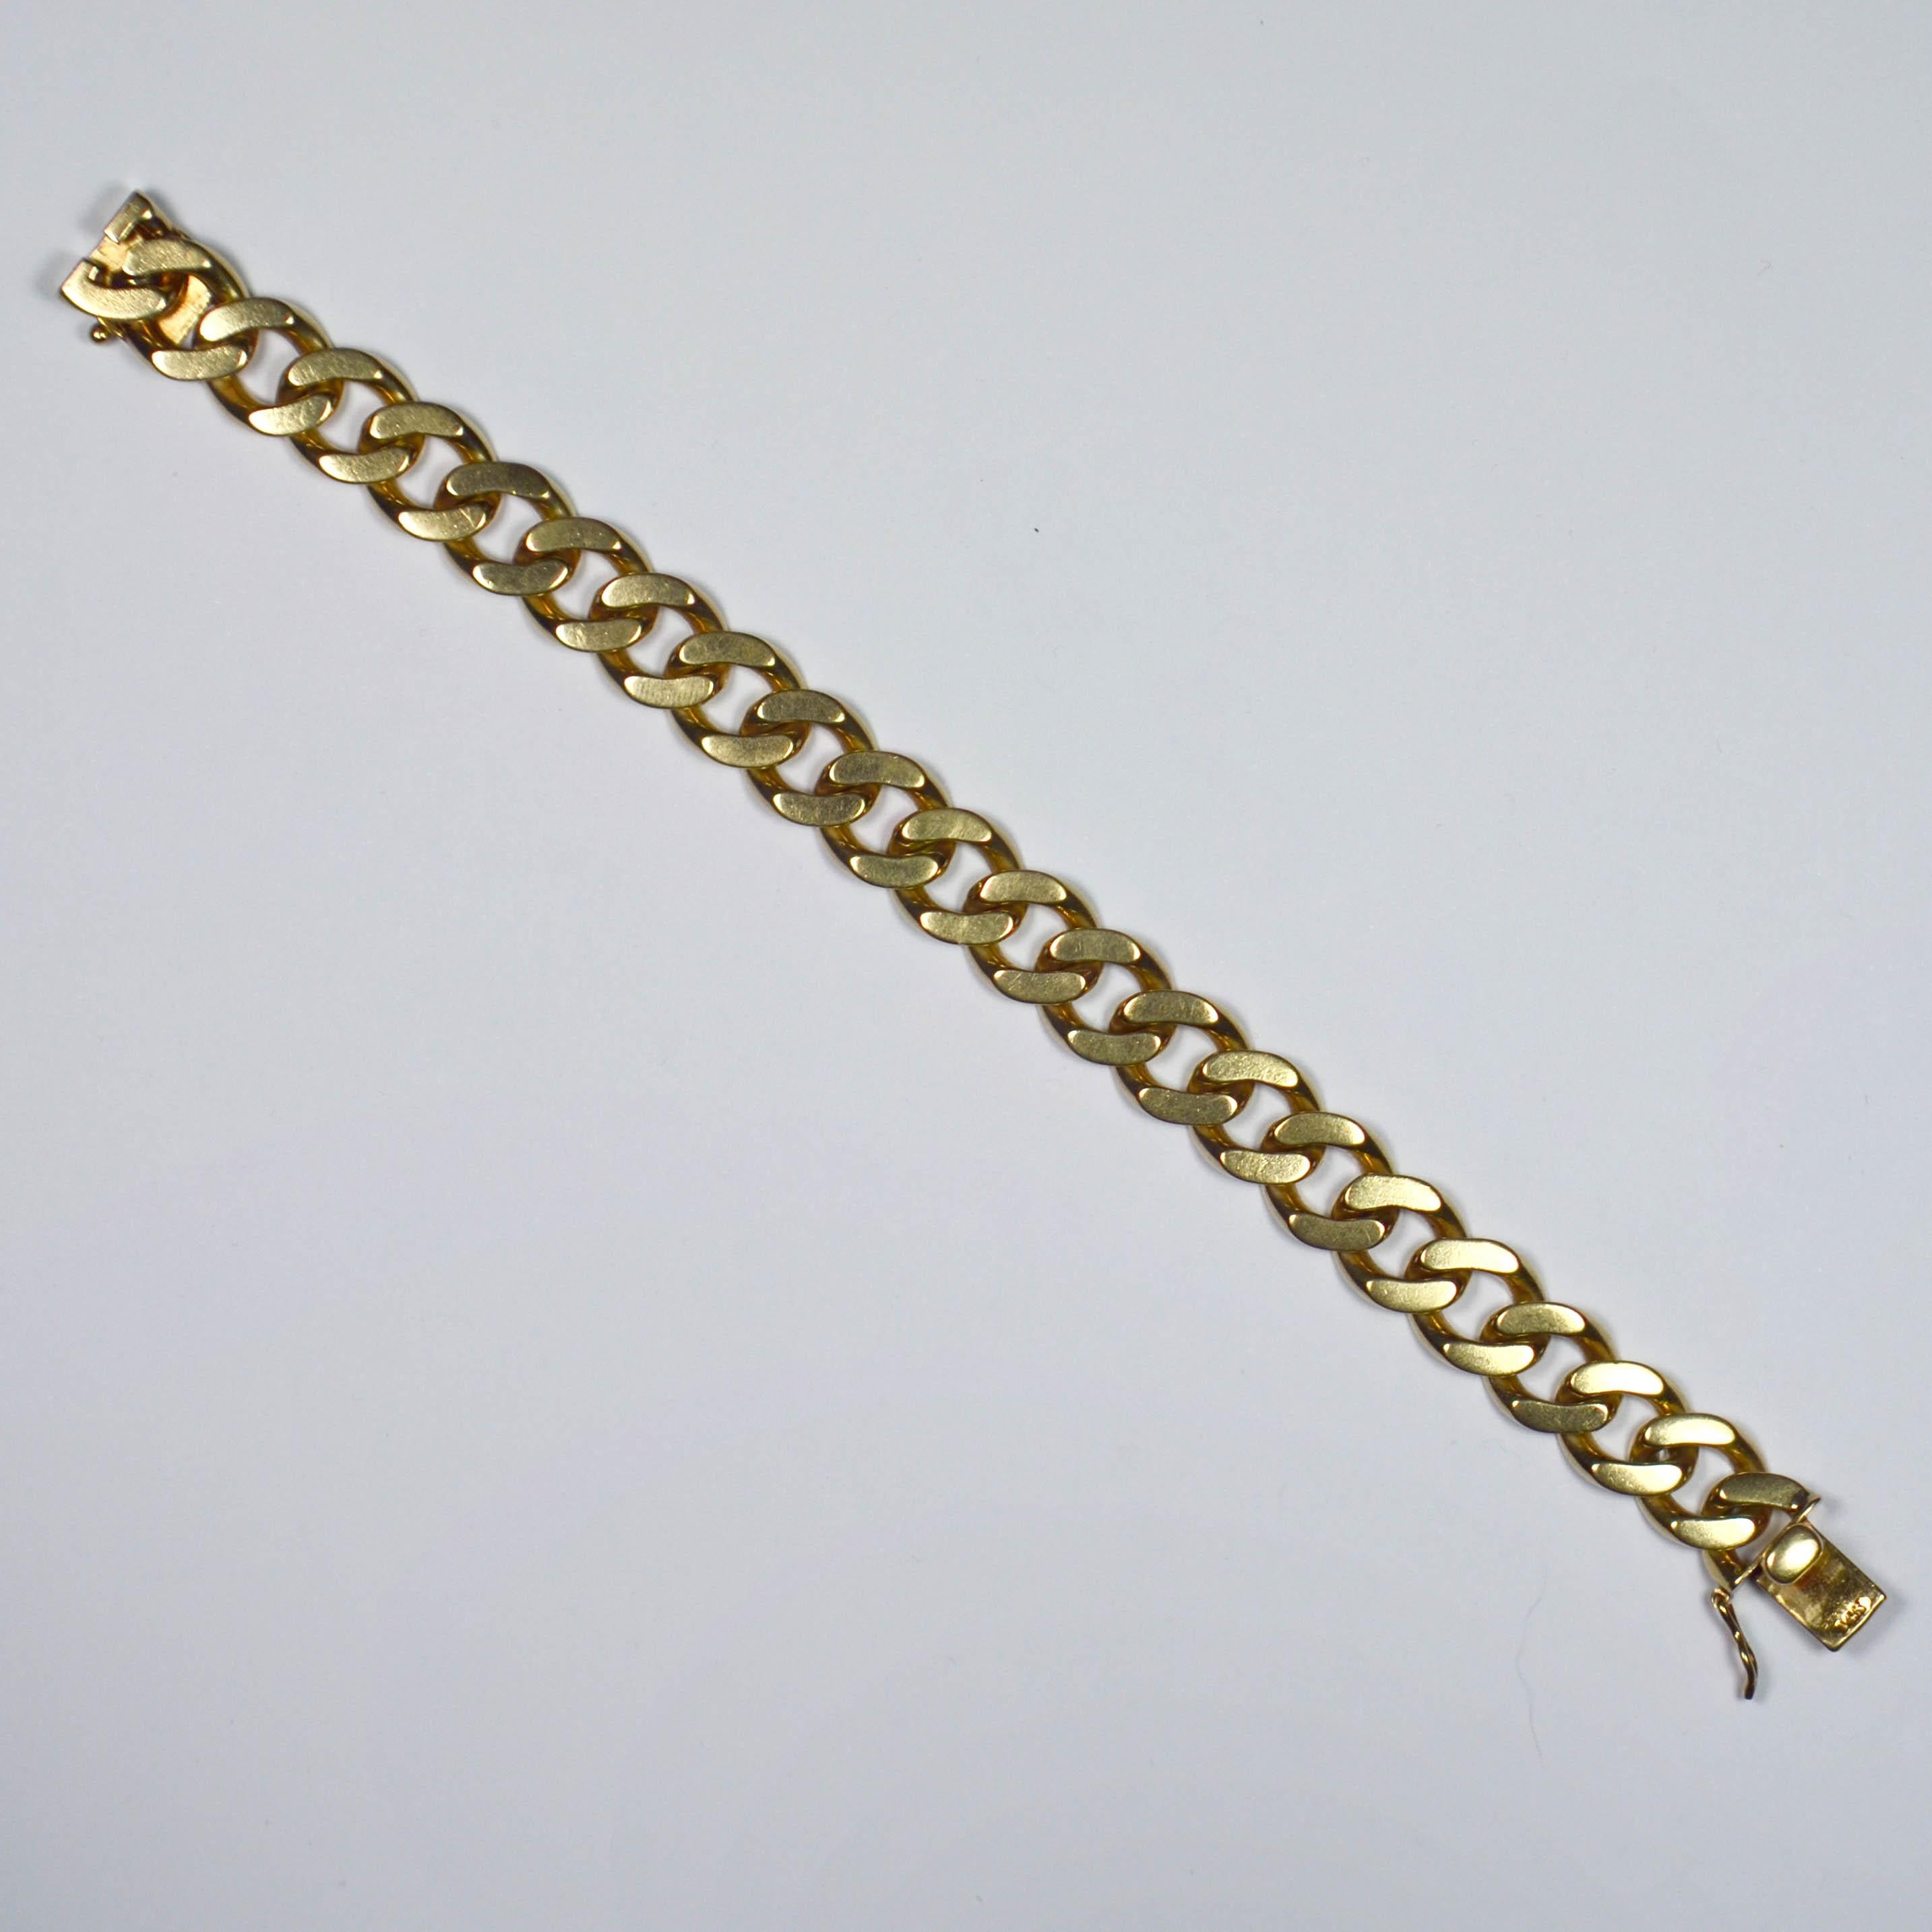 A heavy 14 karat yellow gold curb link chain bracelet. Marked 14K to the box clasp for 14 karat gold and American manufacture.

Dimensions: 18 x 1.1 cm
Weight: 47.75 grams